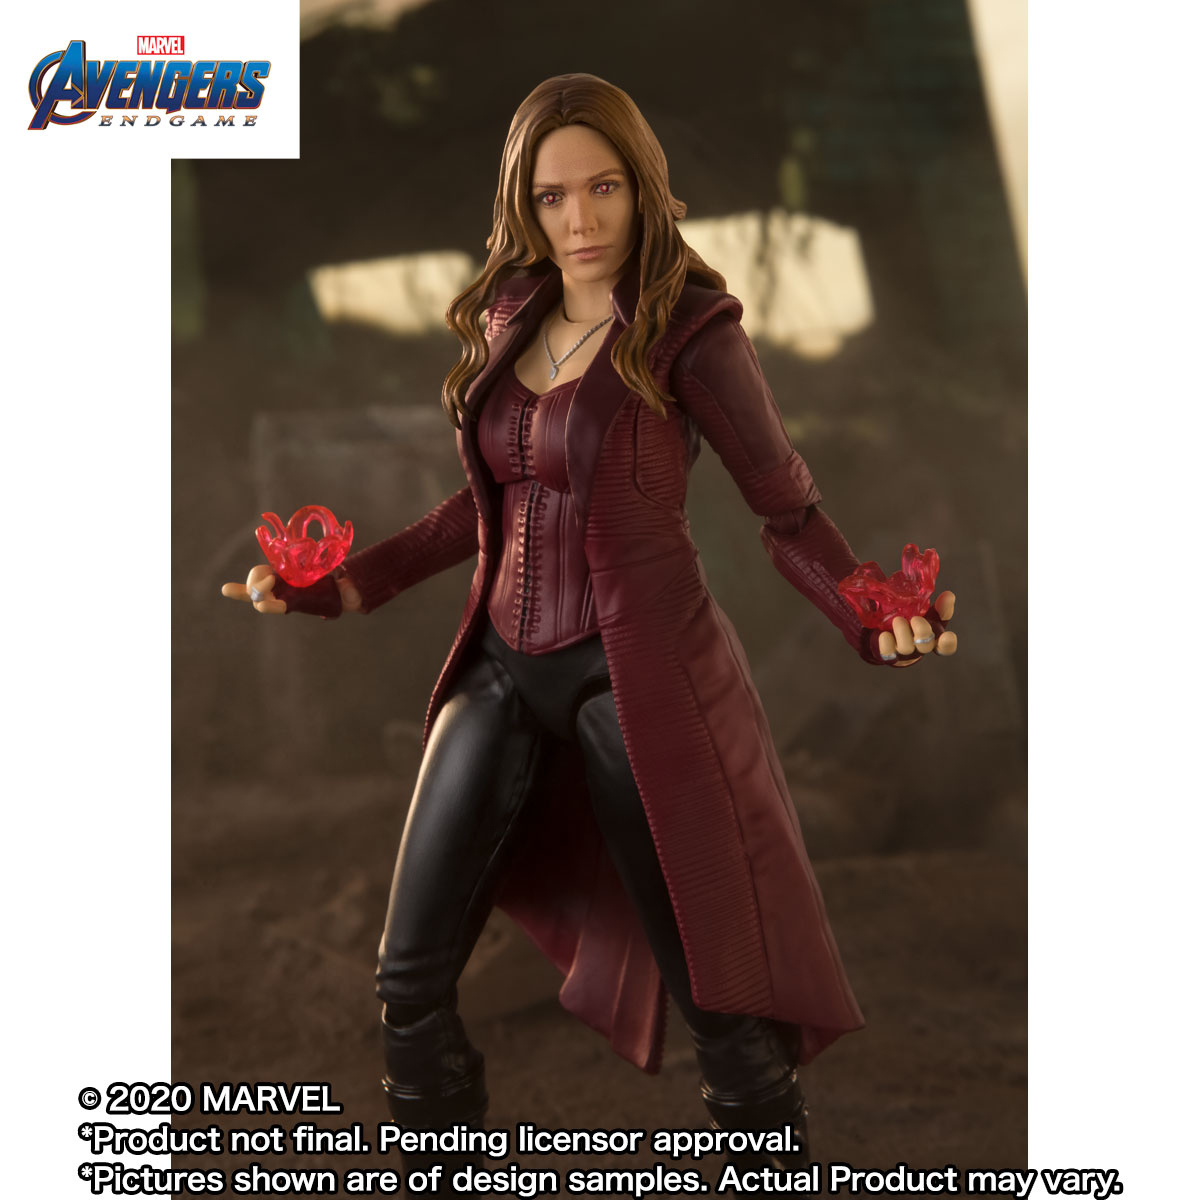 Bandai S.H.Figuarts Scarlet Witch "Avengers Endgame" 